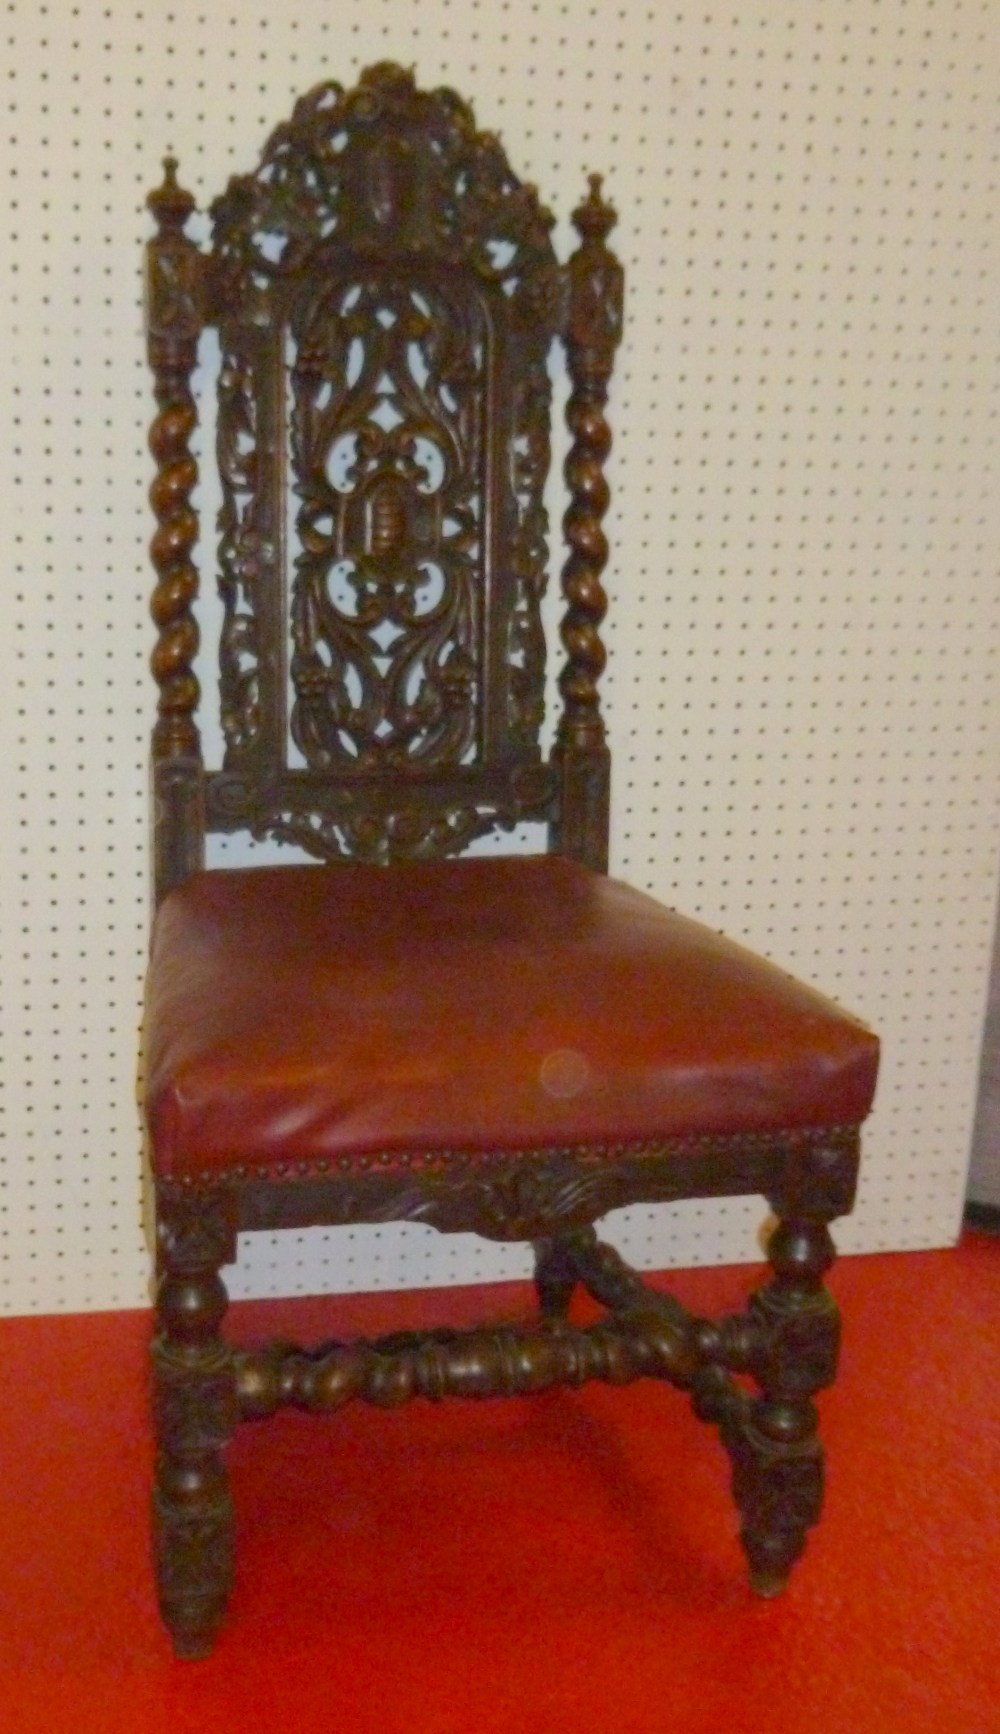 VICTORIAN CARVED OAK CHAIR WITH BARLEY TWIST LEGS AND CARVED AND PIERCED BACK. HEIGHT115CM, WIDTH